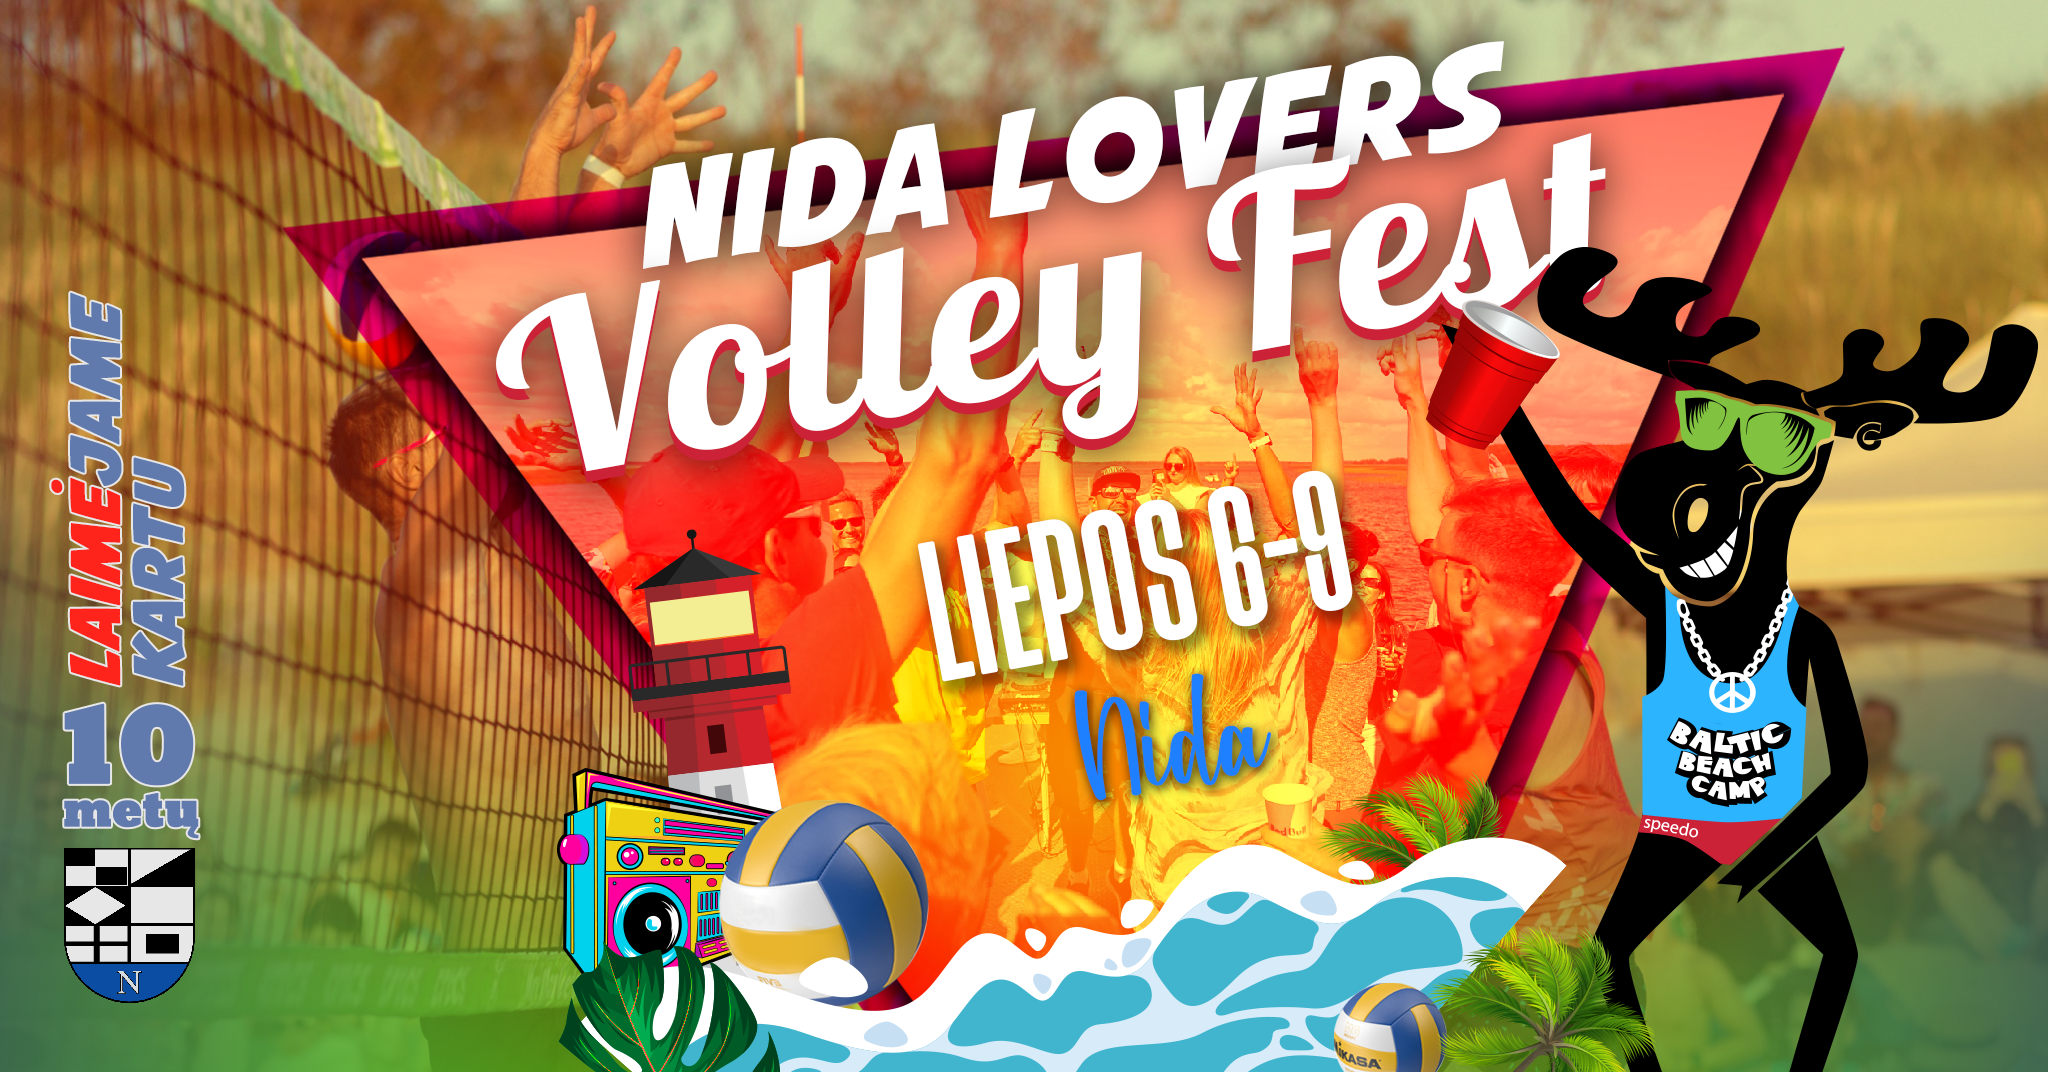 volley fest 2